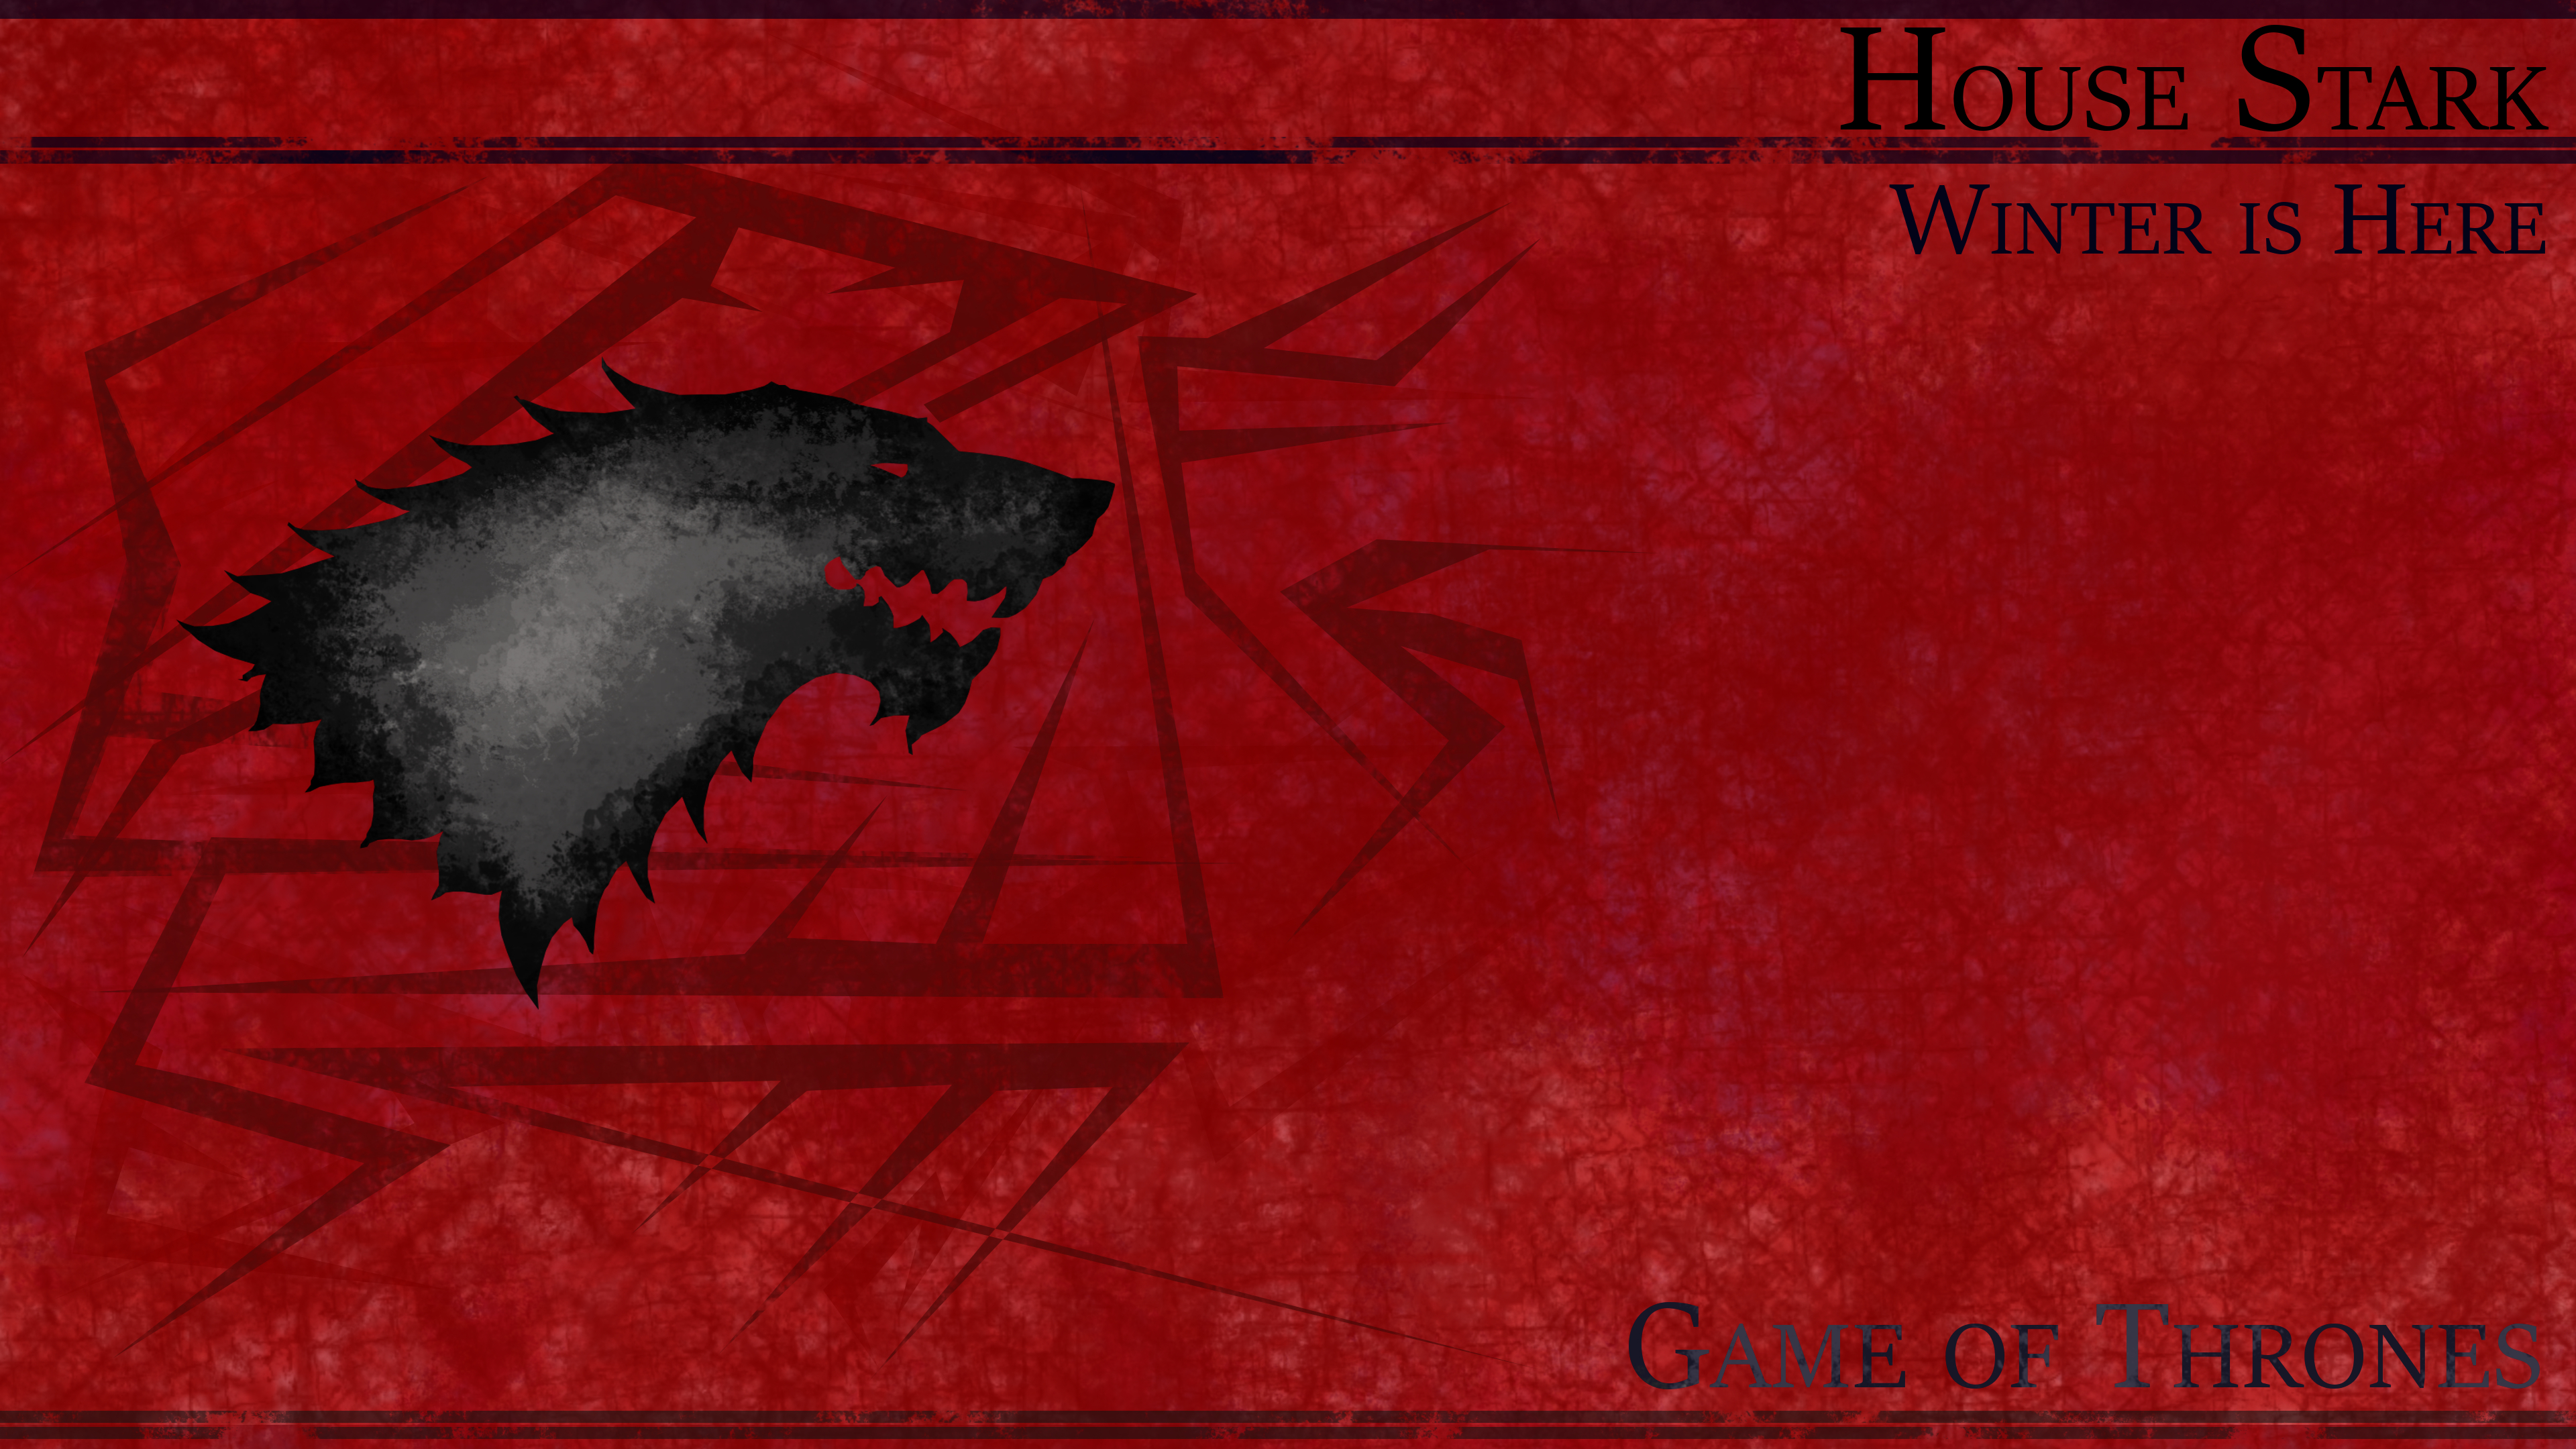 100+] House Stark Wallpapers | Wallpapers.com